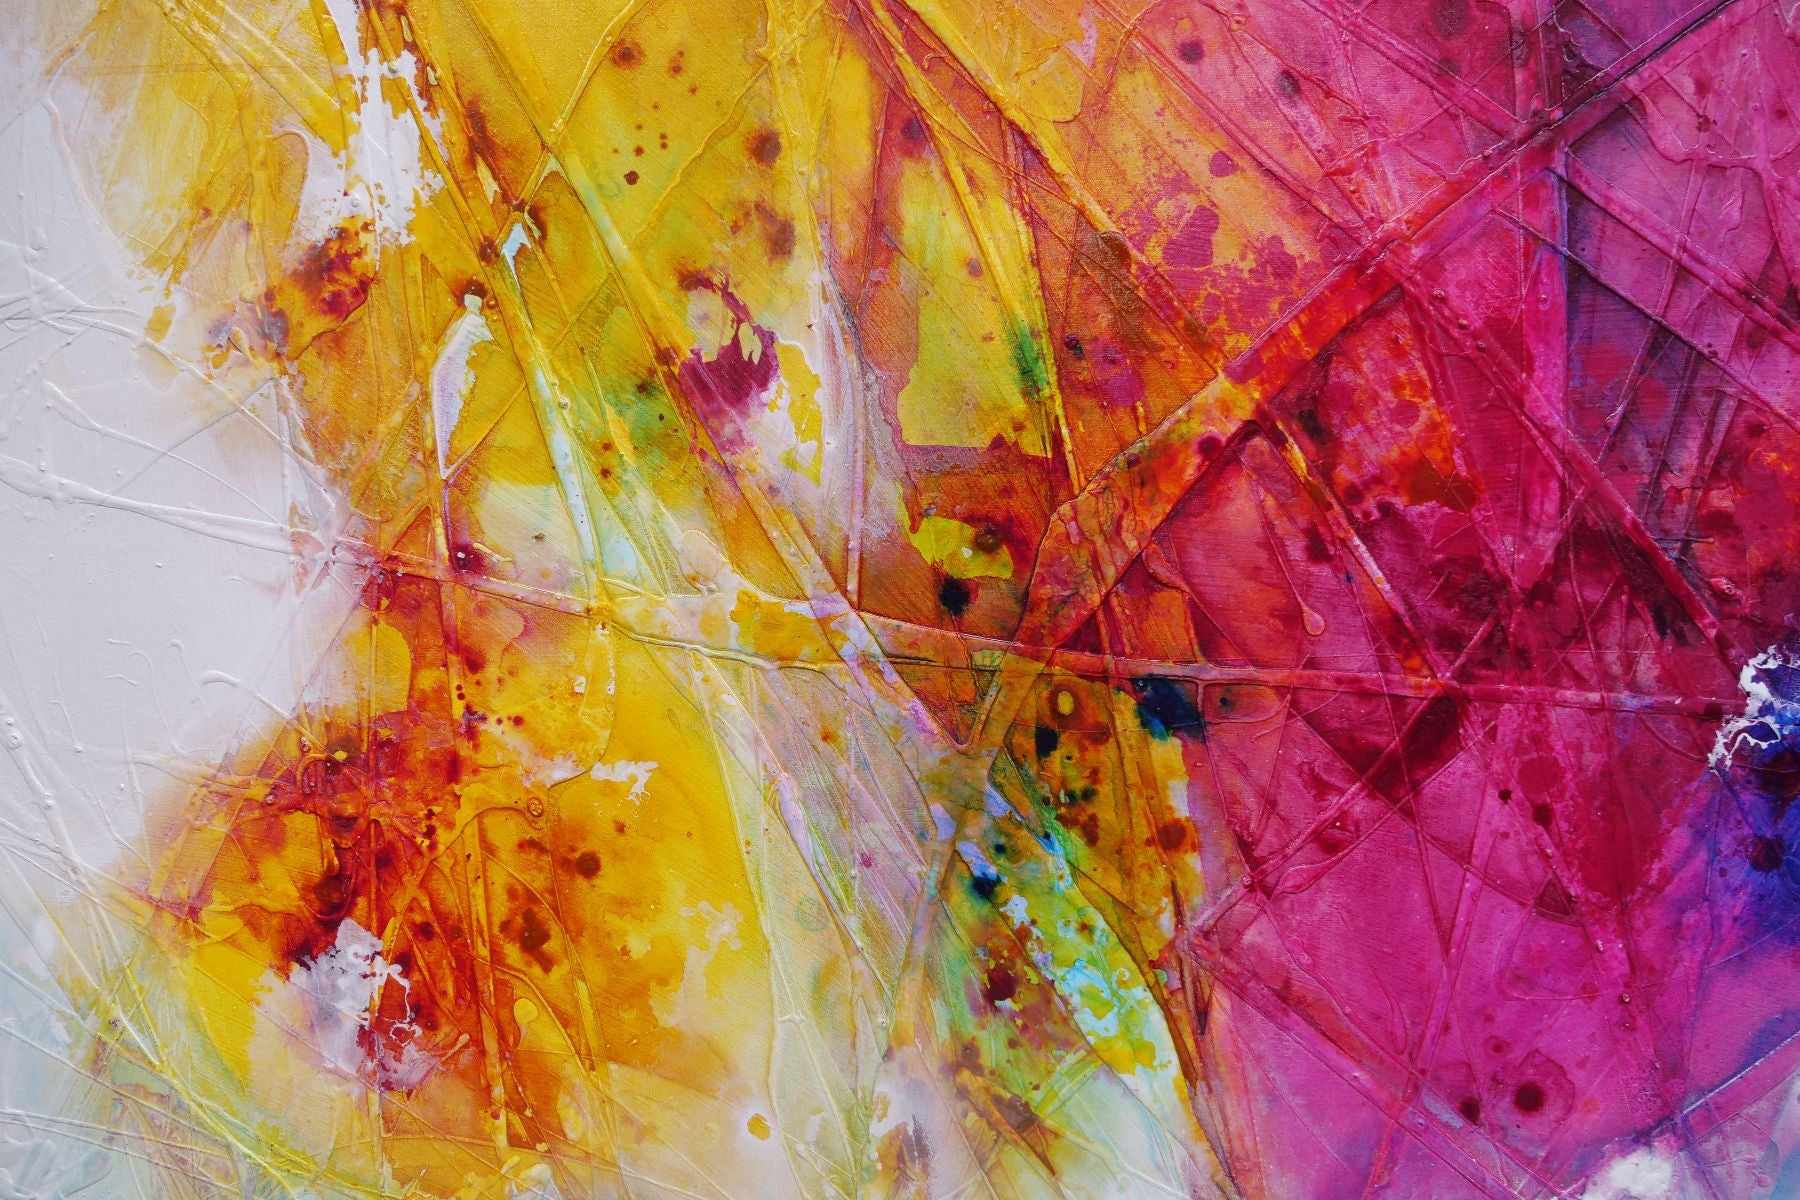 Inked Colour Pop 240cm x 100cm Colourful Textured Abstract Painting (SOLD)